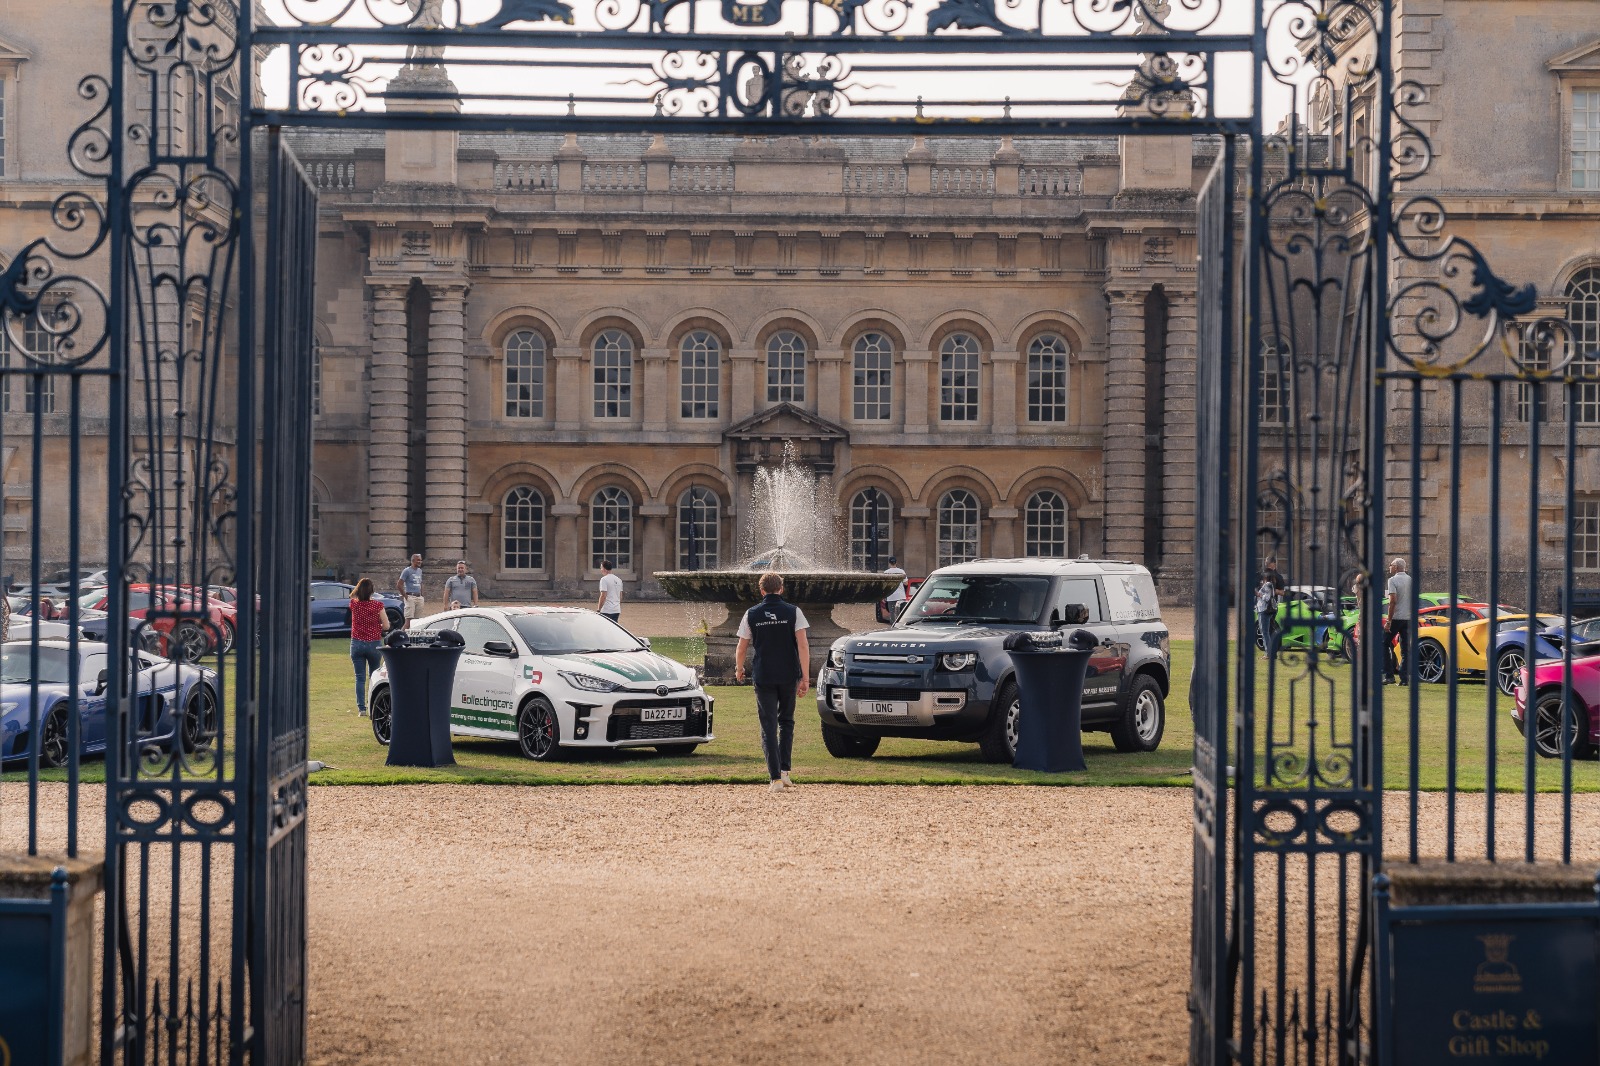 SUPERCAR DRIVER X COLLECTING CARS AT GRIMSTHORPE CASTLE